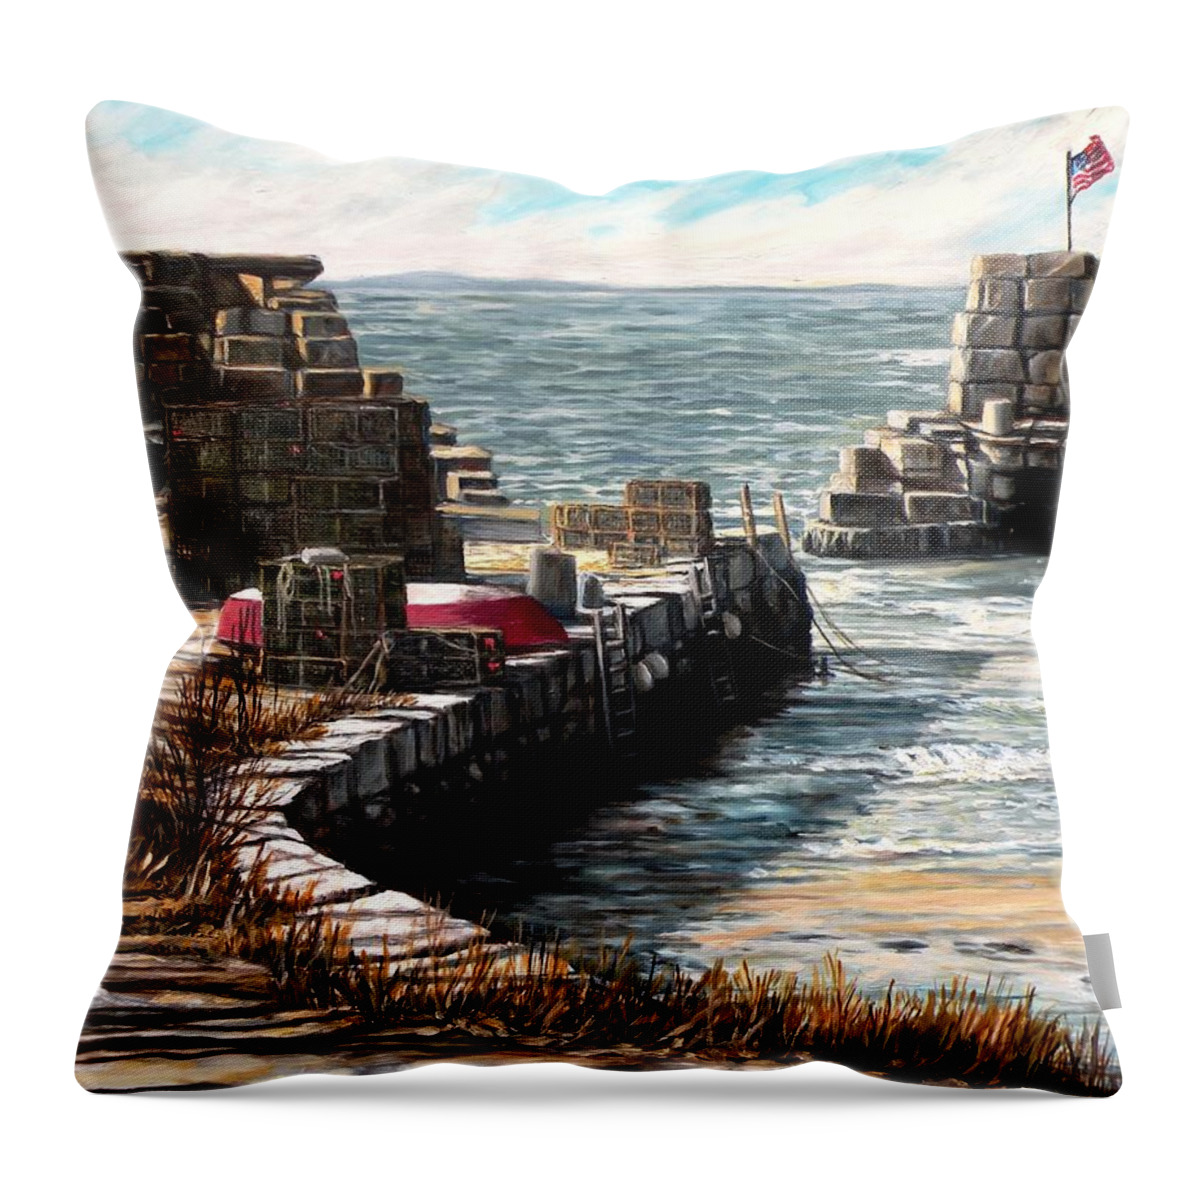 Lanes Cove Throw Pillow featuring the painting Windy Day At Lanes Cove by Eileen Patten Oliver